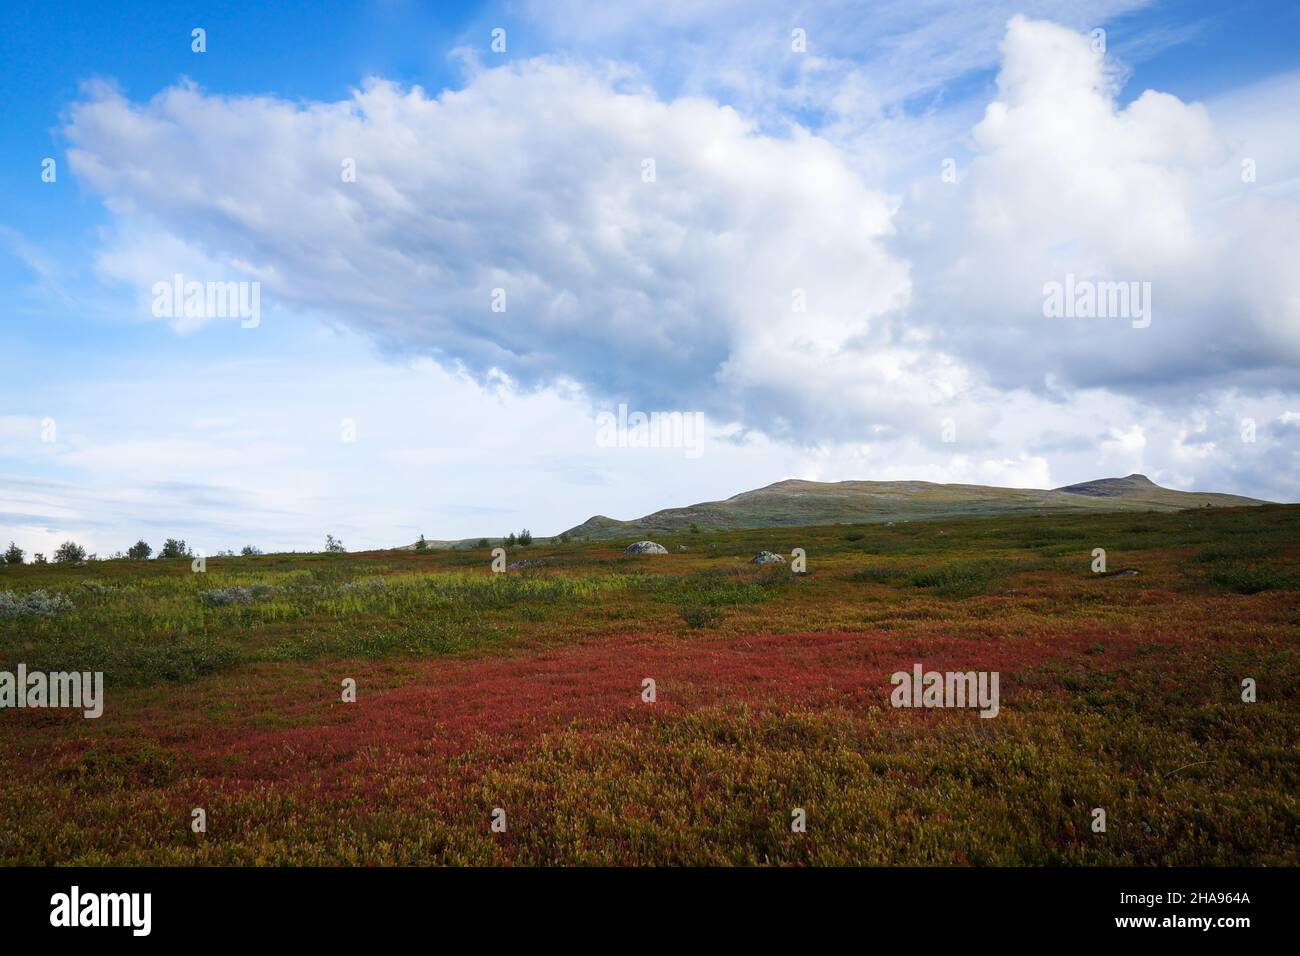 Hiking in colourful landscape of Pieljekaise National Park, Sweden Stock Photo